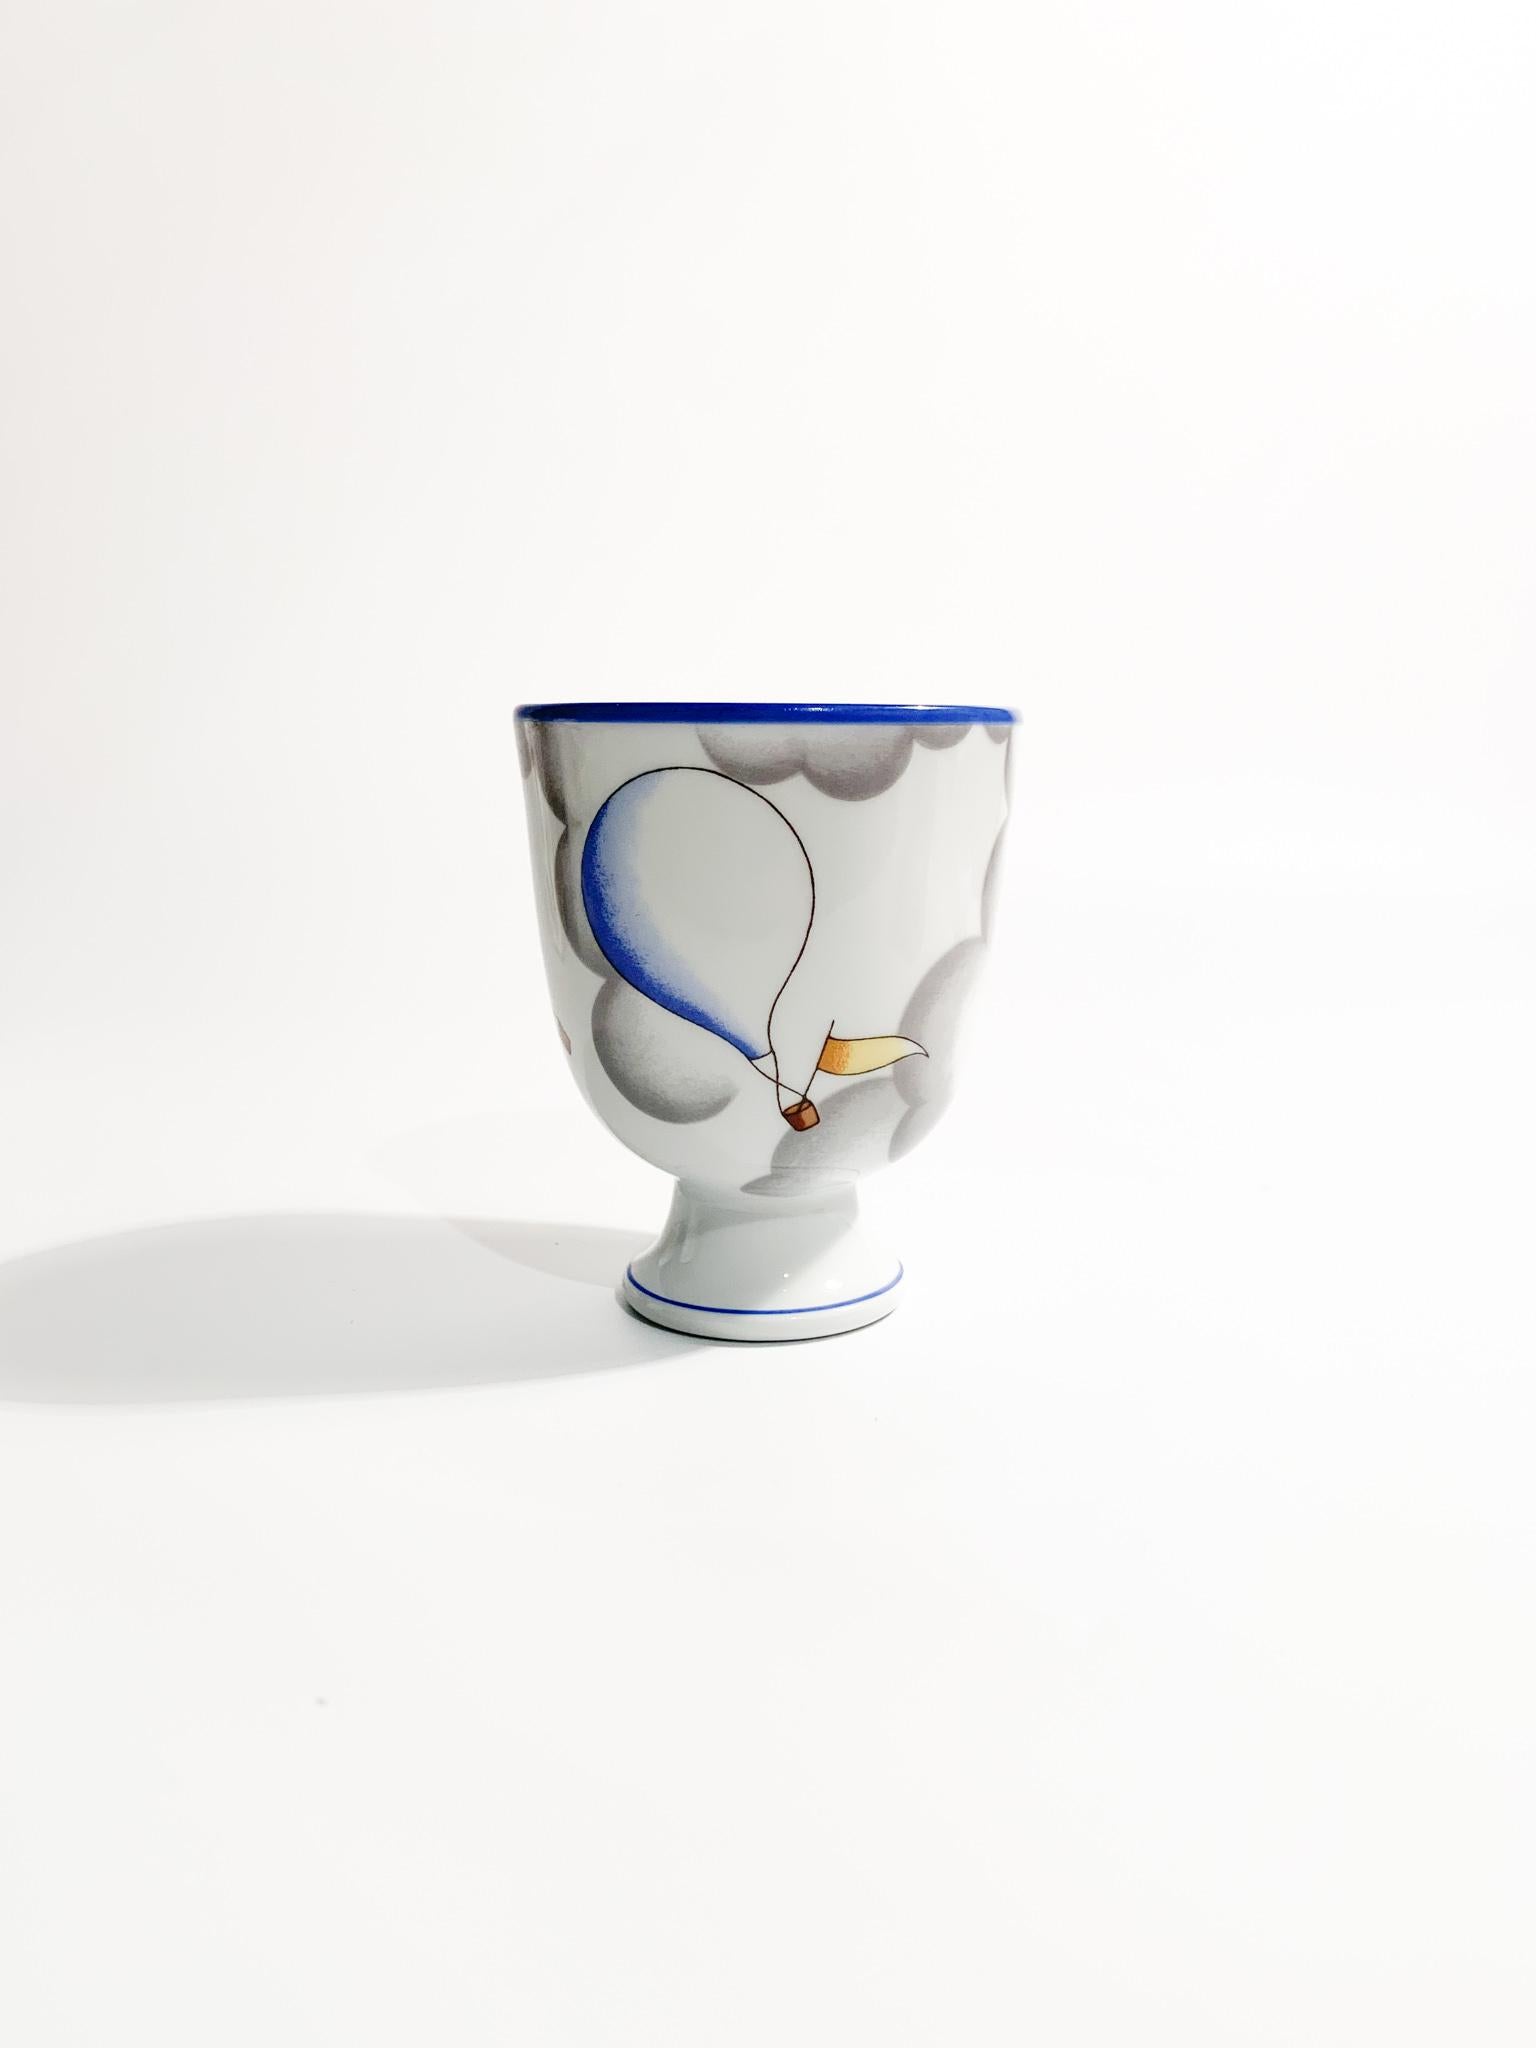 Cup from the Alato Collection by Gio Ponti from 1927, re-edition by Richard Ginori

Ø cm 7 h cm 8

Company of Lombard origin founded in 1896 when the Marquis Carlo Ginori, passionate about white gold, arrived in Doccia to build a porcelain factory.